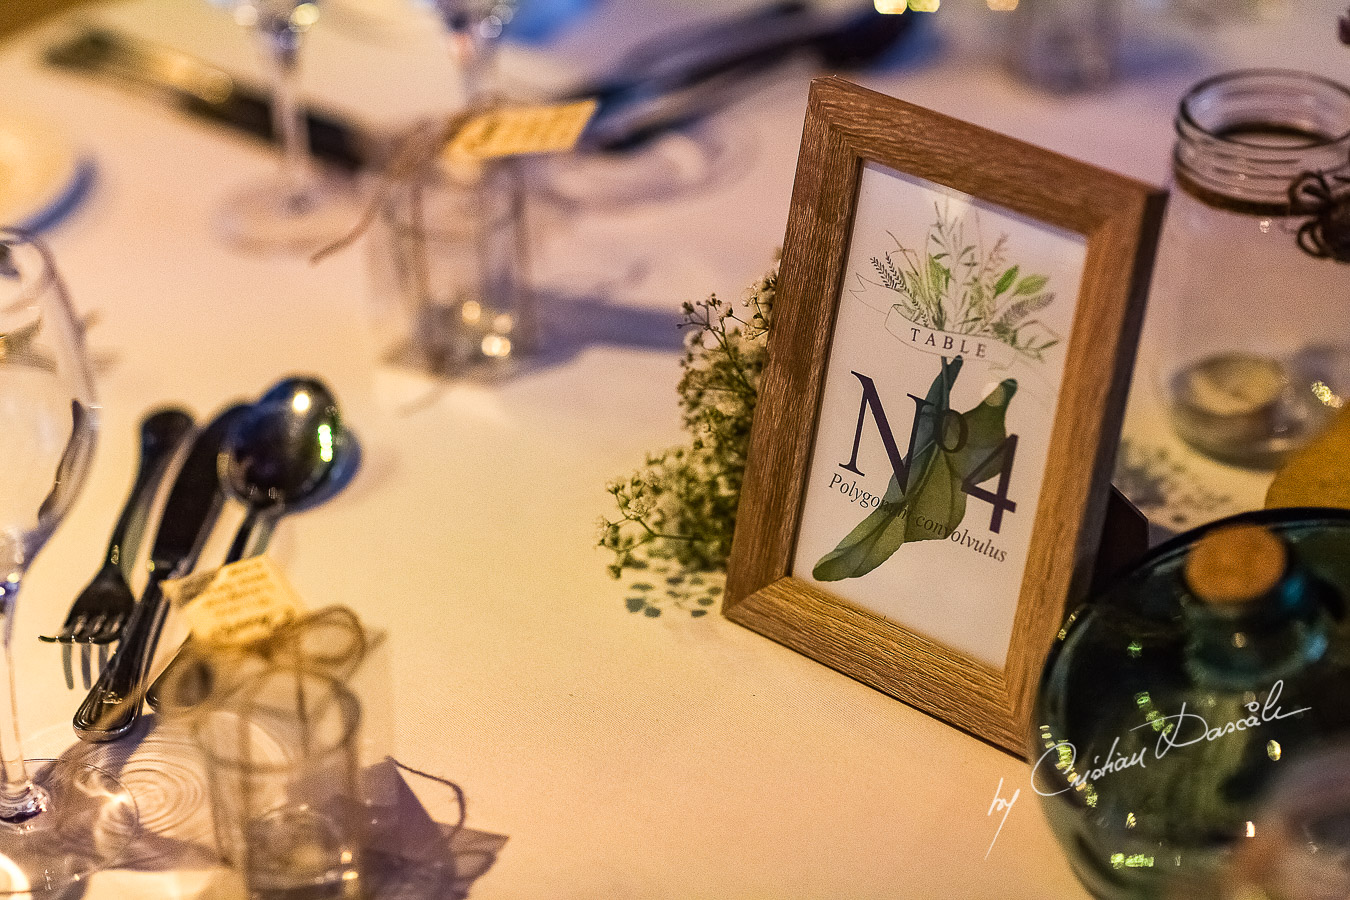 Wedding Decorations and Details photographed as part of an Exclusive Wedding photography at Grand Resort Limassol, captured by Cyprus Wedding Photographer Cristian Dascalu.